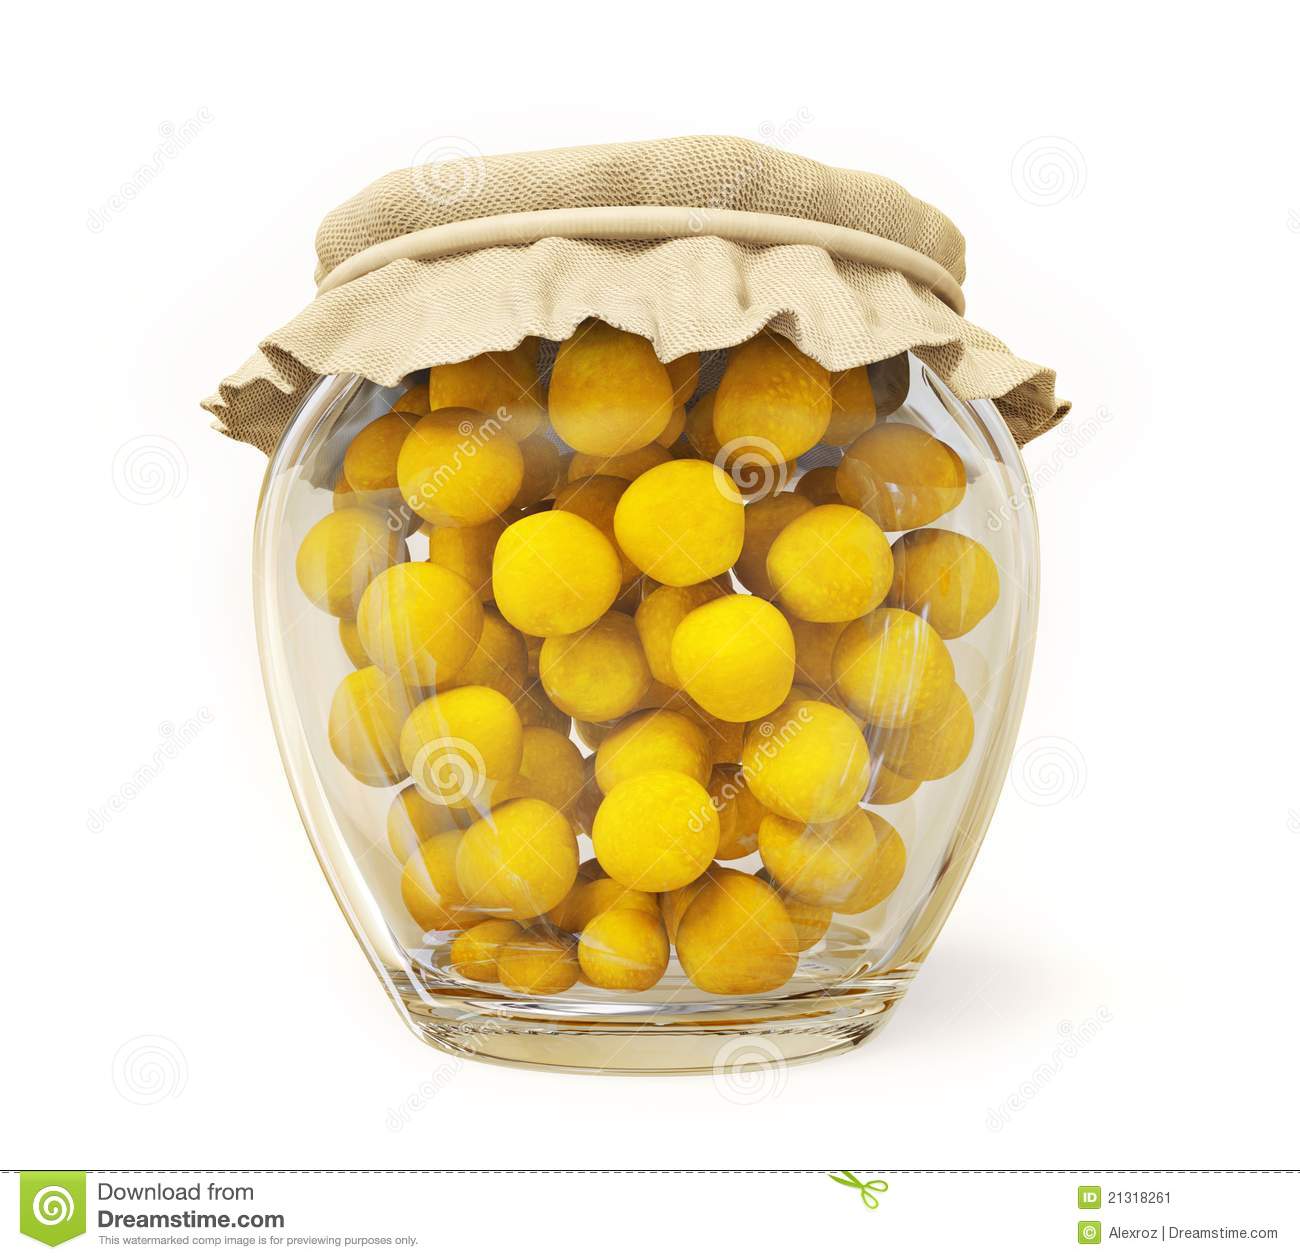 Canned Fruits In A Glass Jar Isolated On White